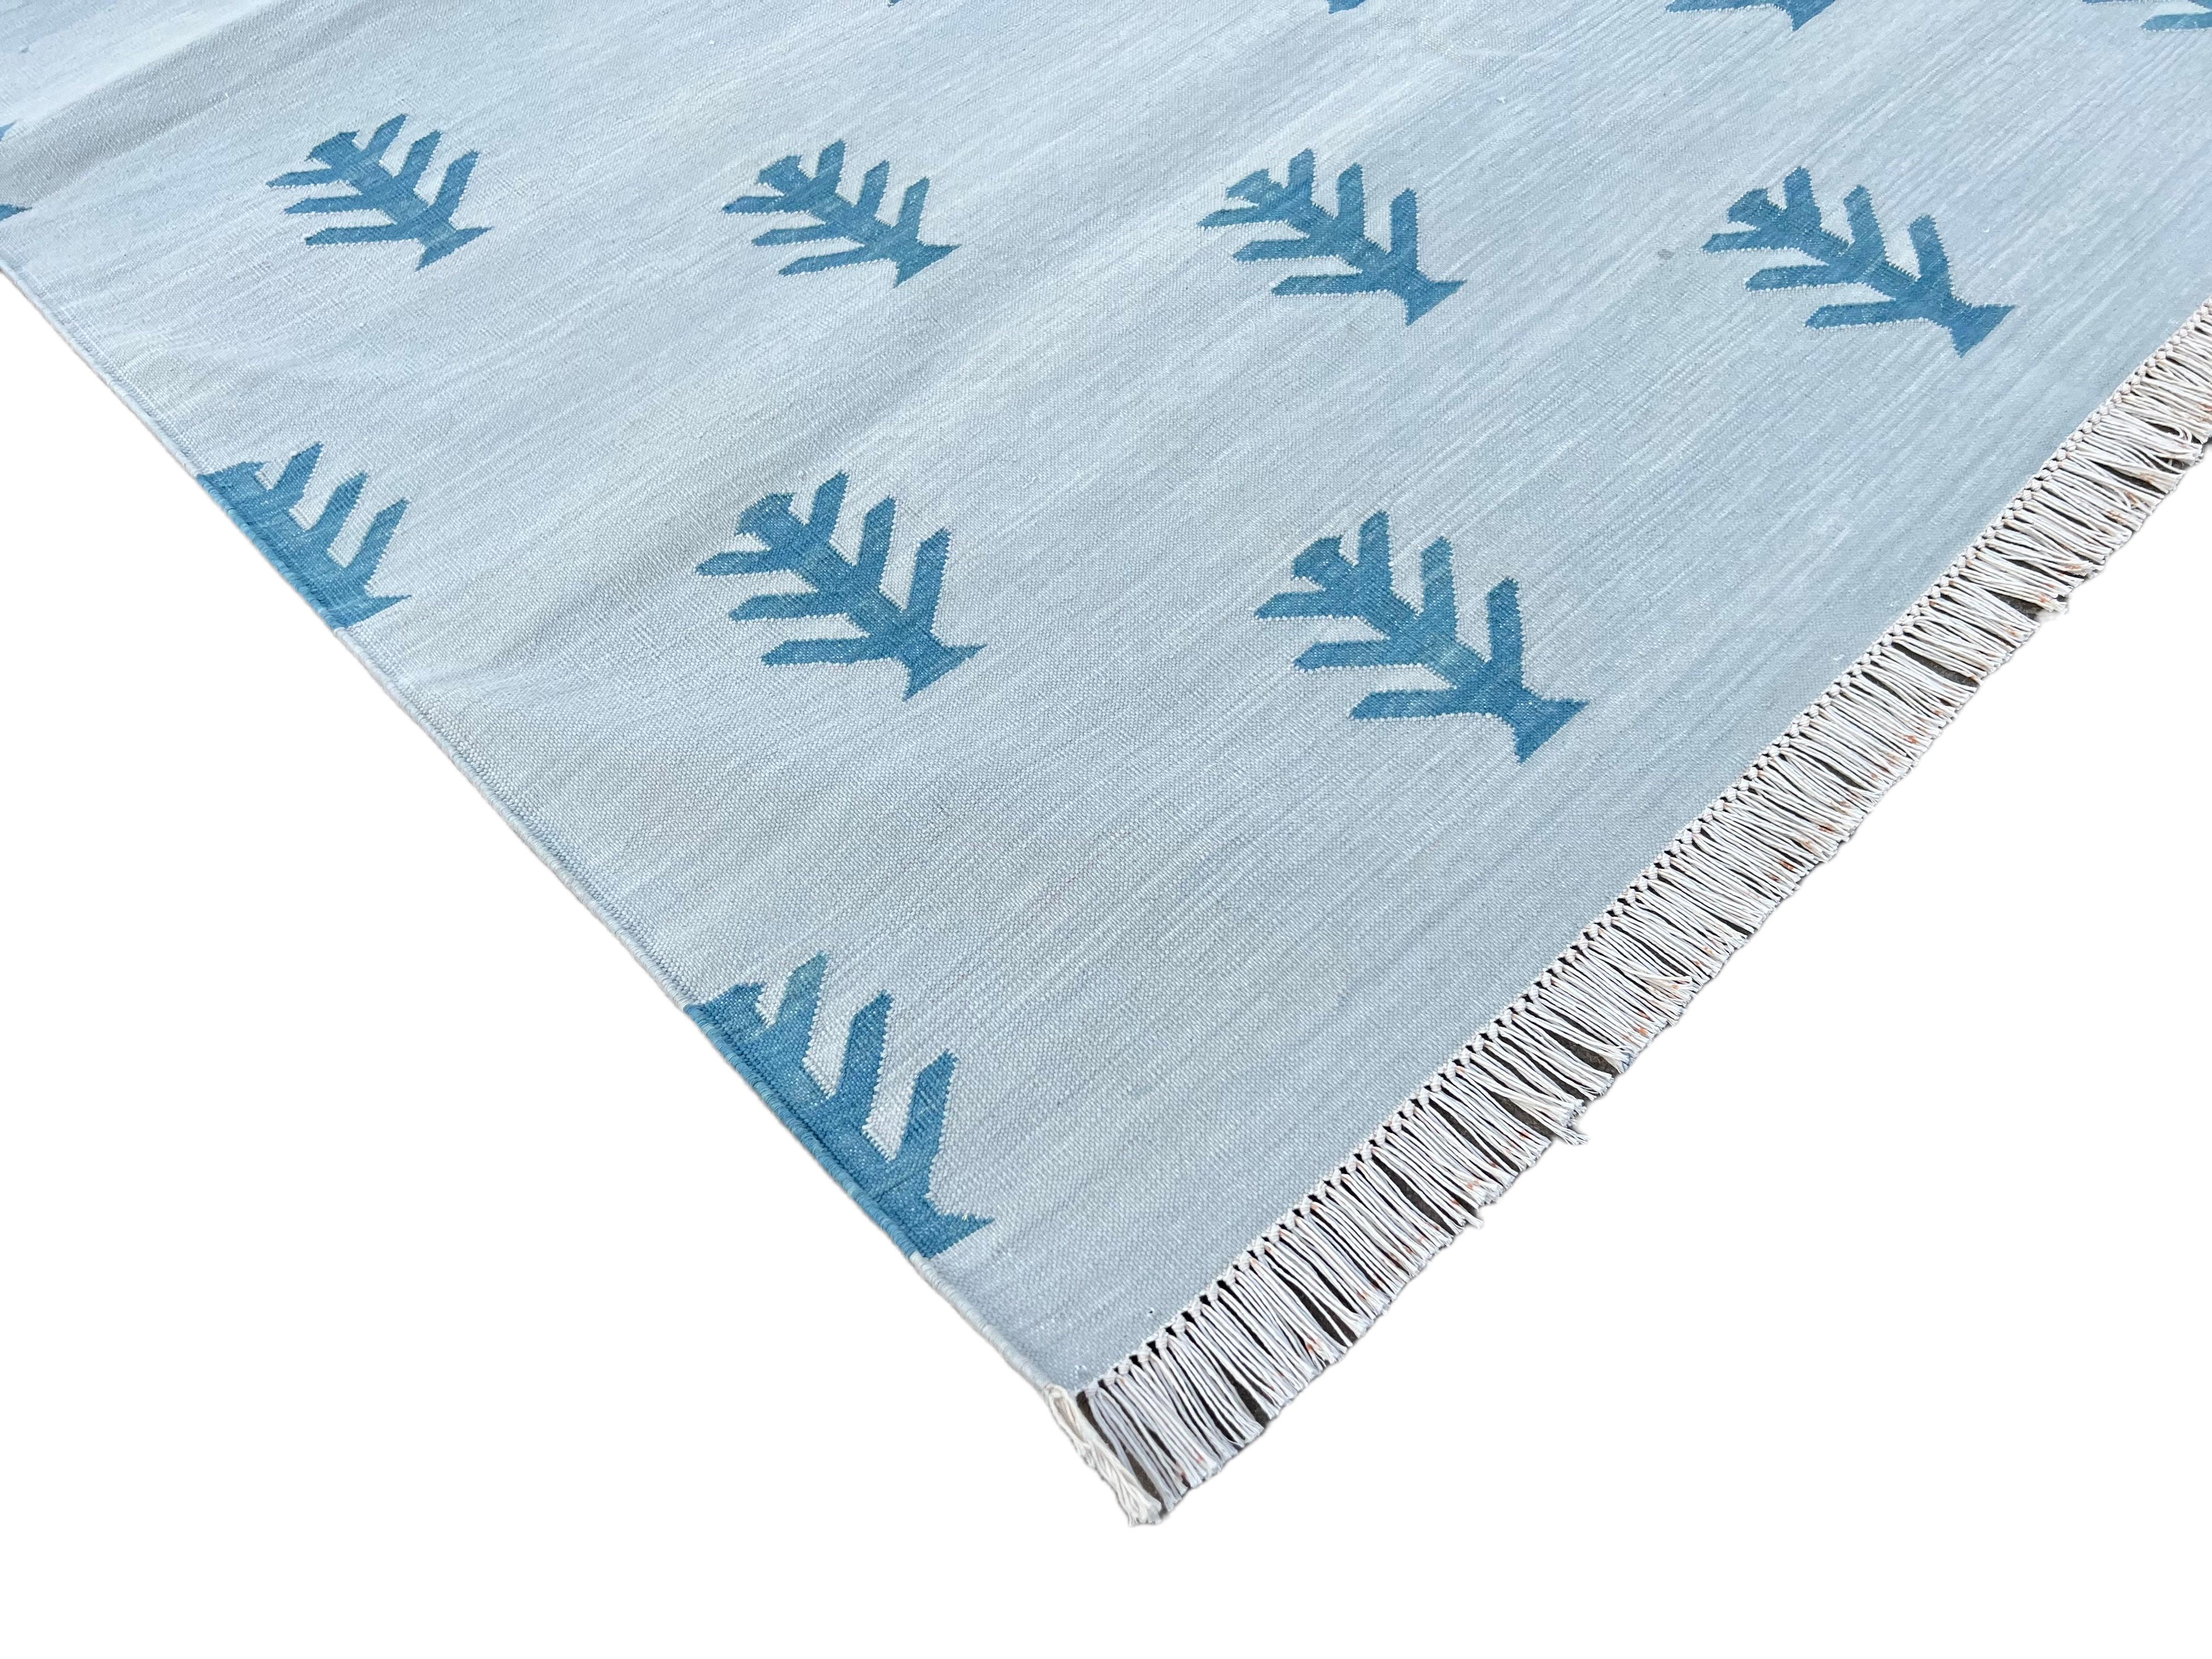 Mid-Century Modern Handmade Cotton Area Flat Weave Rug, 4x6 Grey, Blue Tree Pattern Indian Dhurrie For Sale